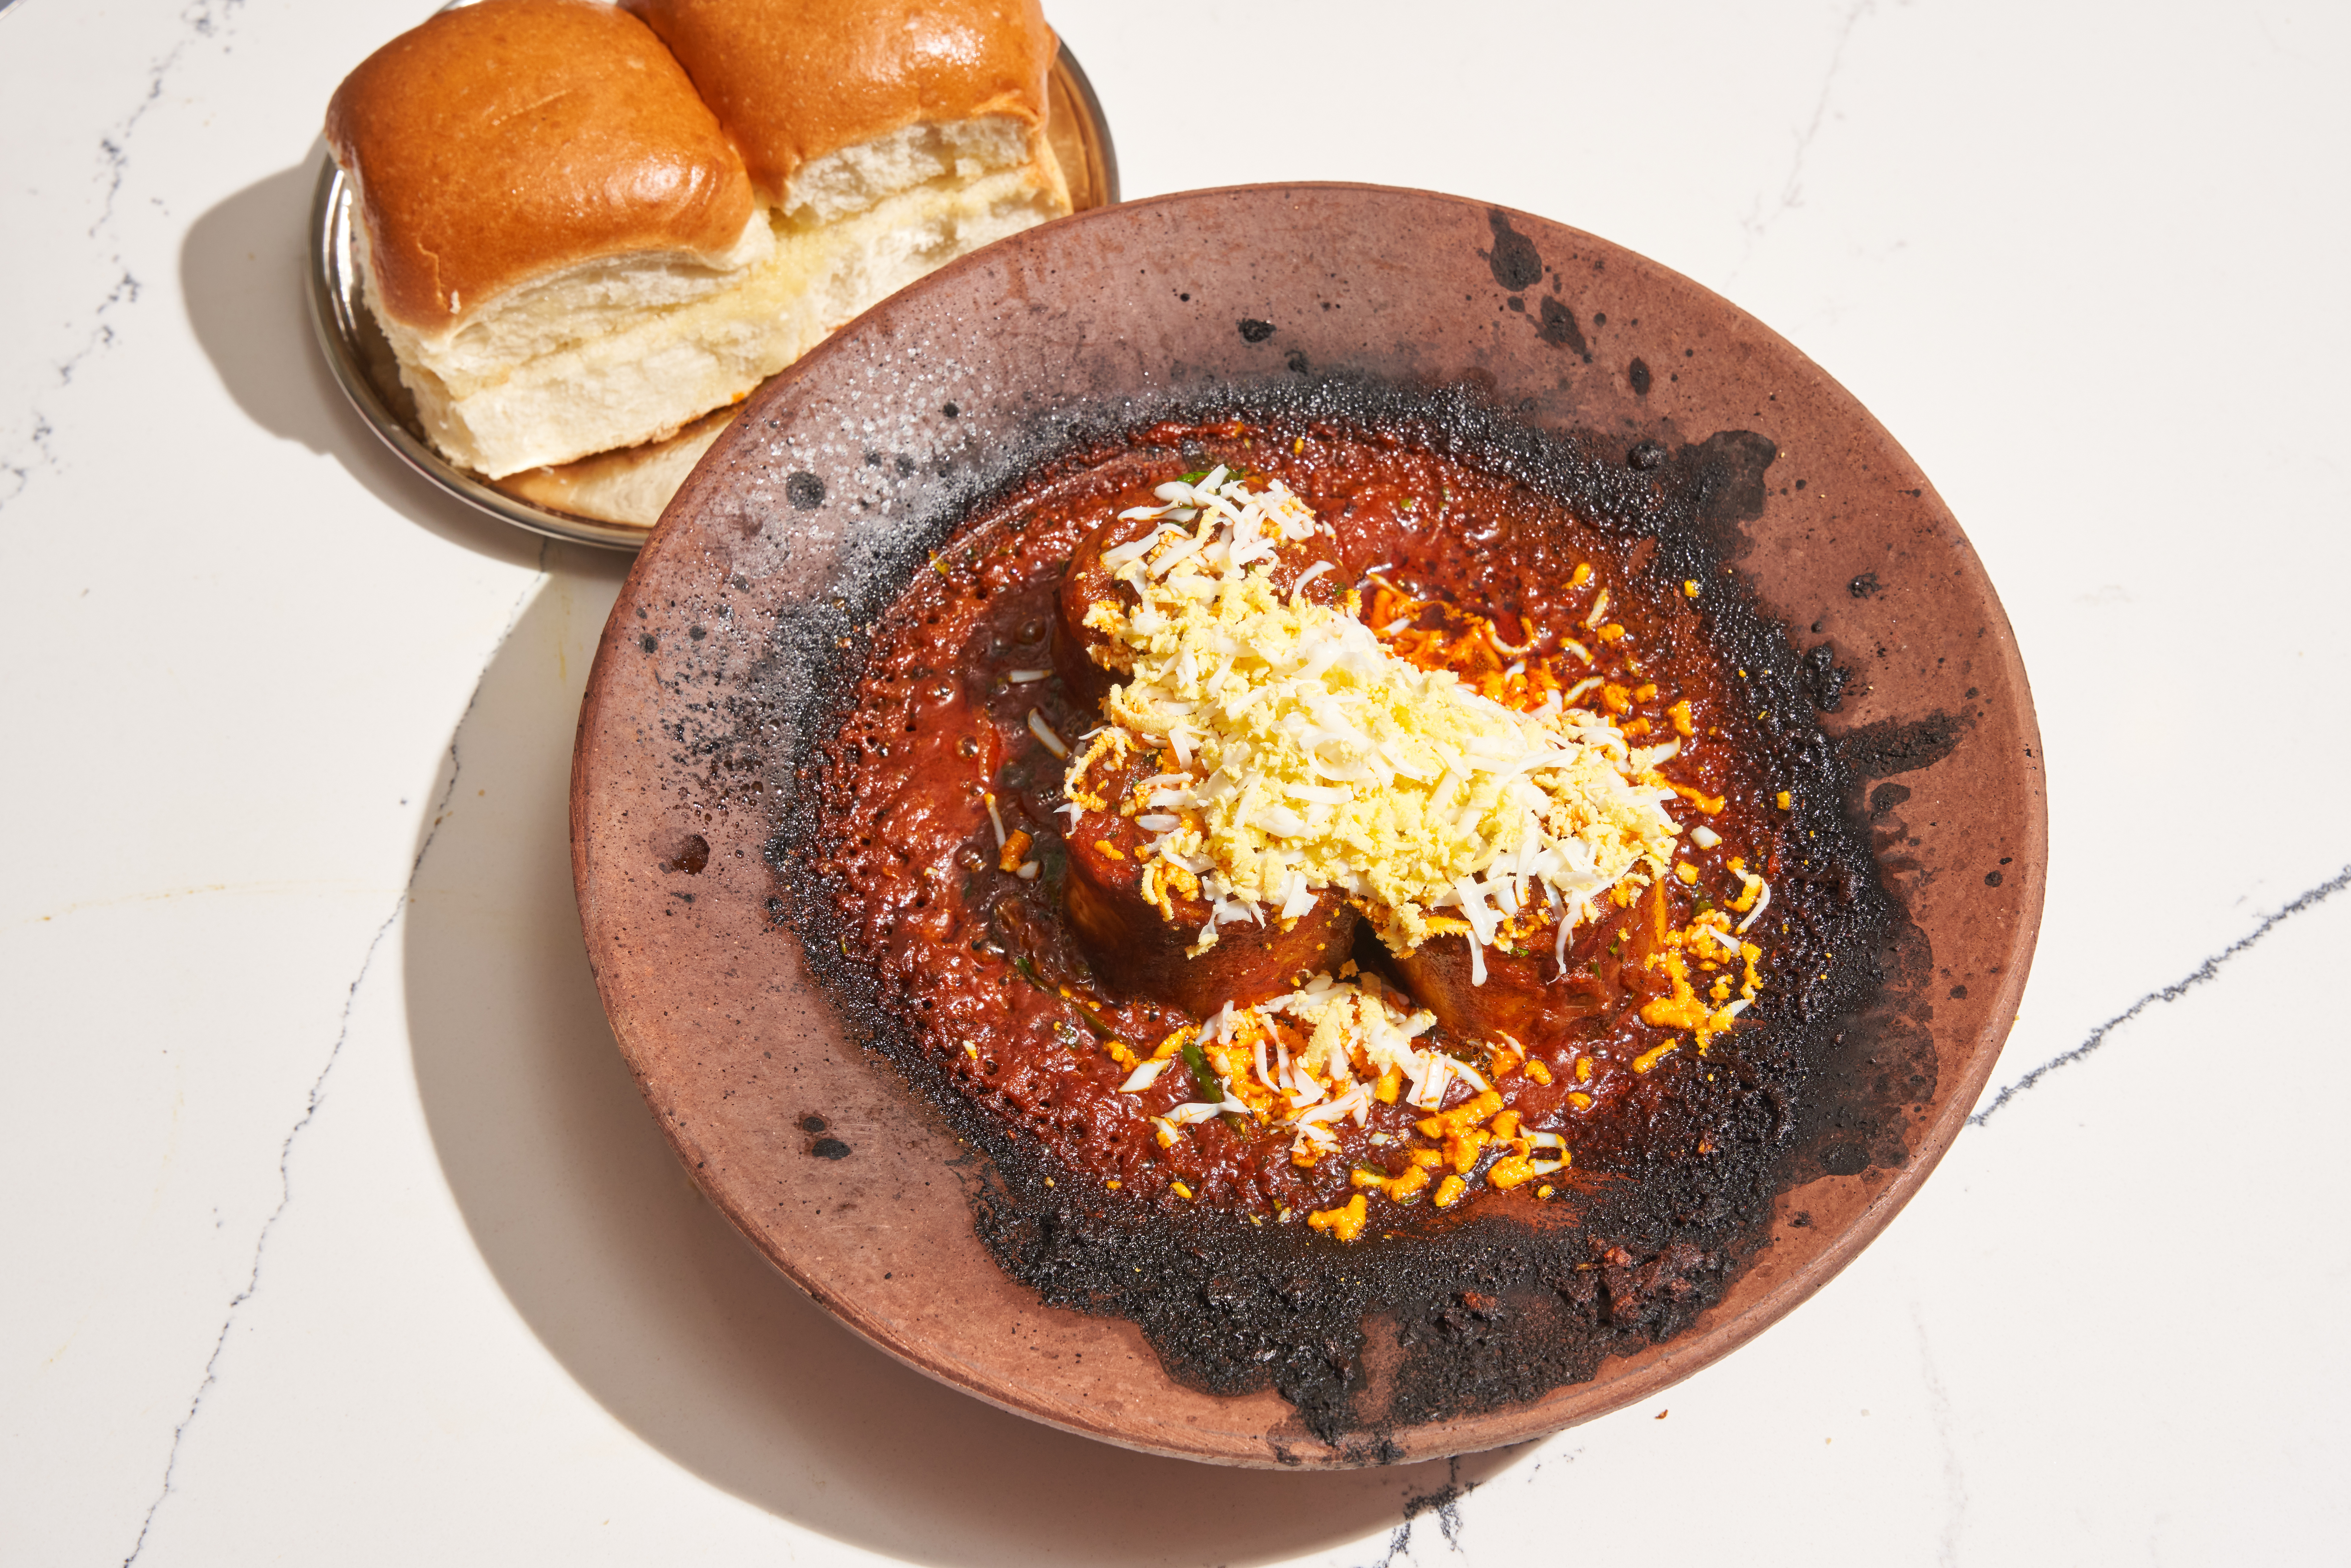 A wide-mouthed clay bowl of beef and red sauce with two golden buns on a small plate off to the side.